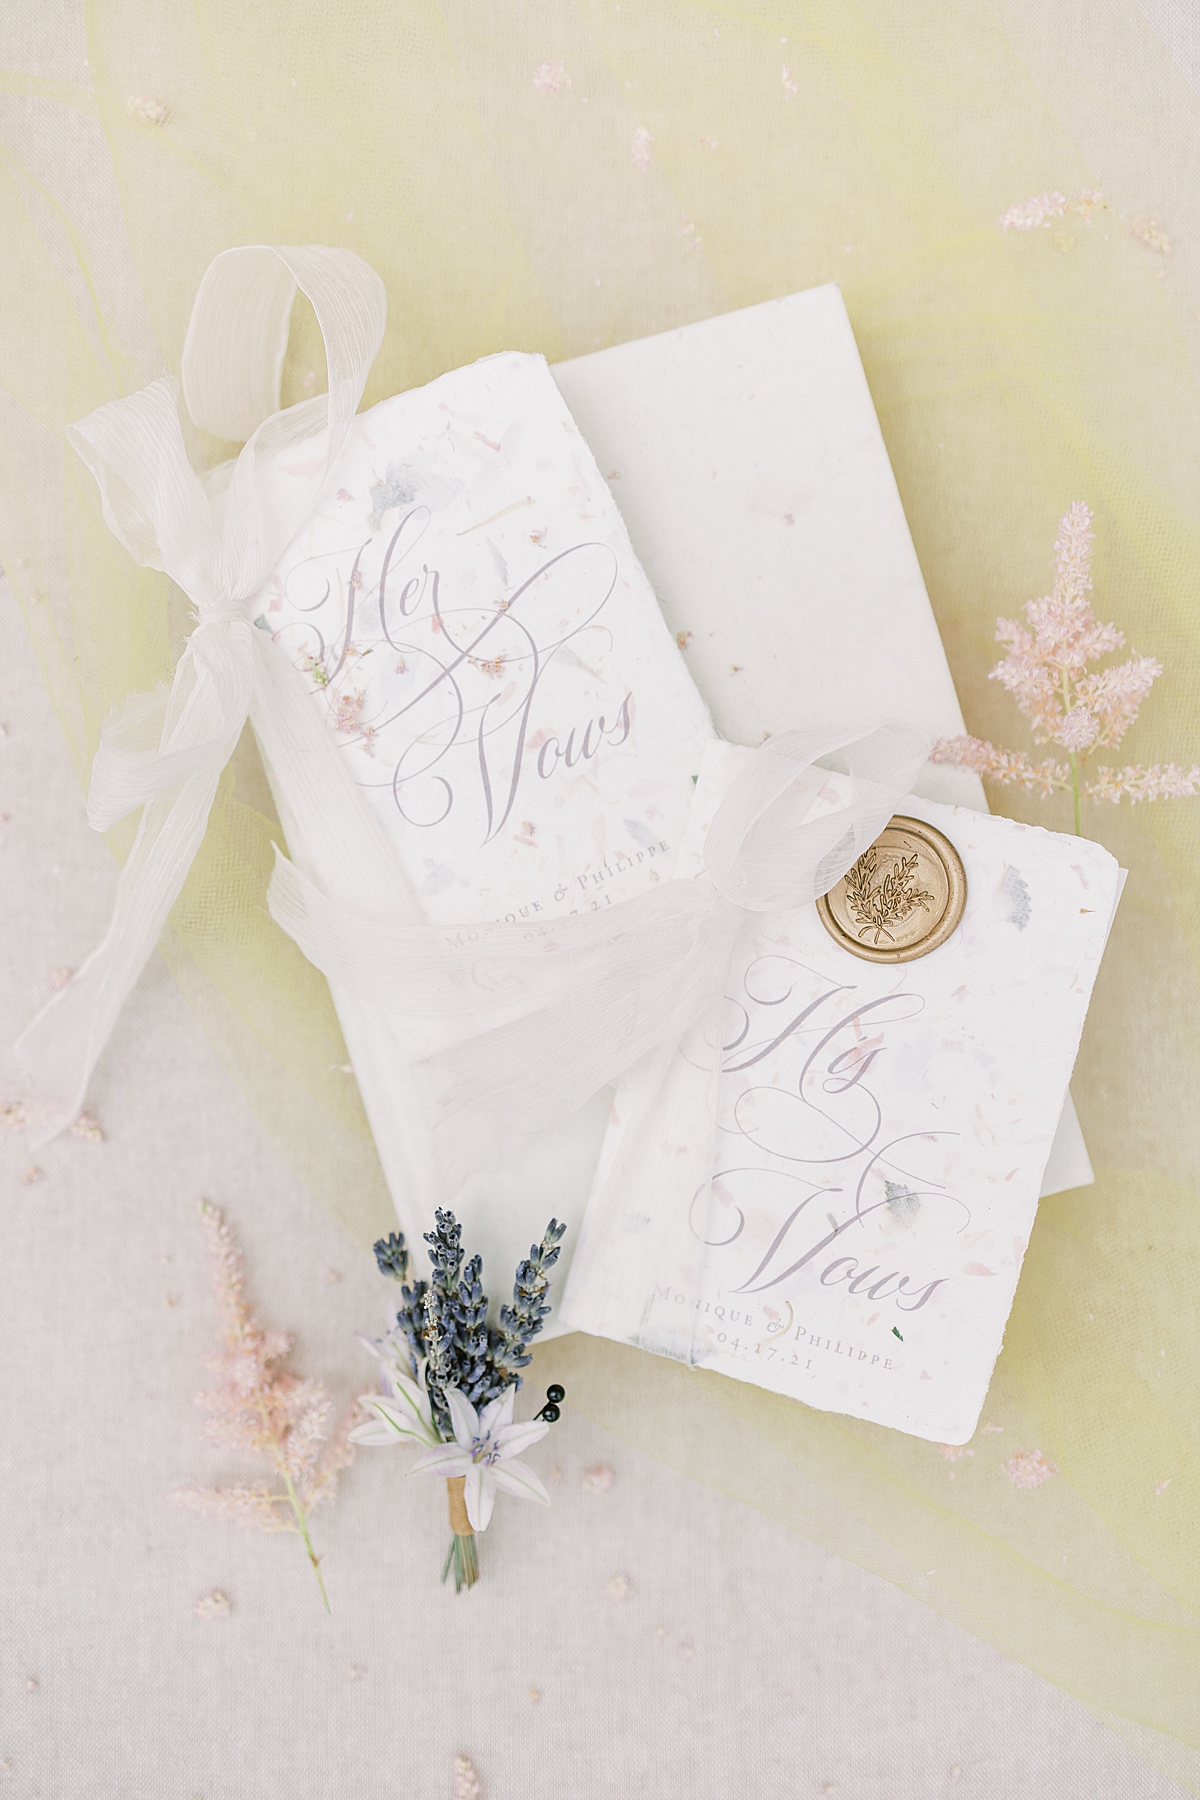 The couple's vow books stamped with a wax seal and a small bushel of lavender 